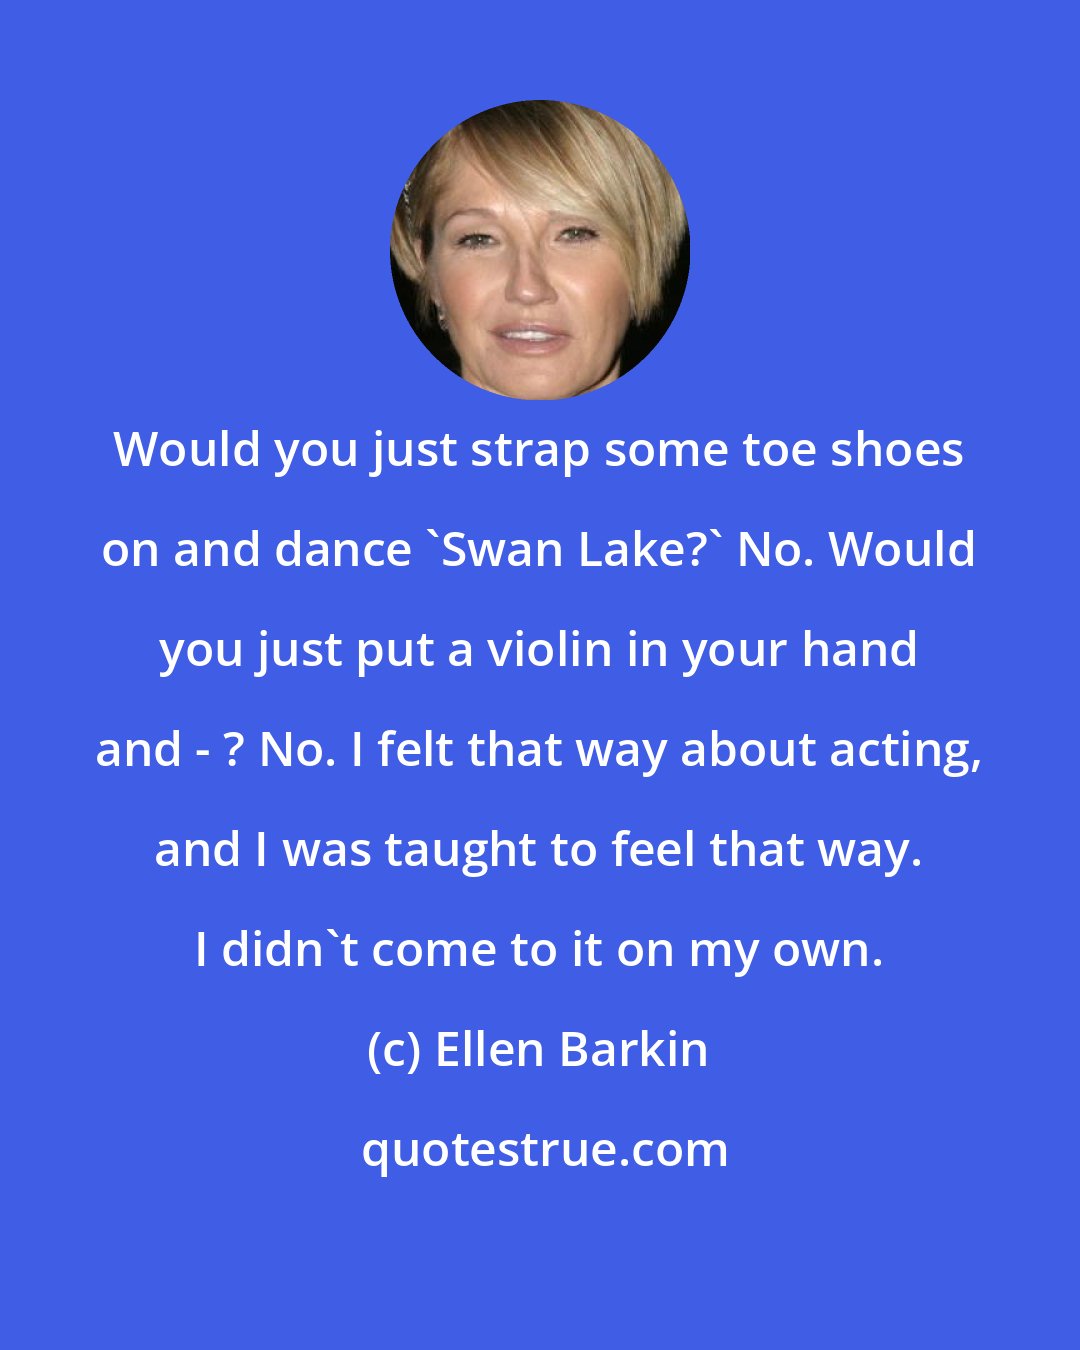 Ellen Barkin: Would you just strap some toe shoes on and dance 'Swan Lake?' No. Would you just put a violin in your hand and - ? No. I felt that way about acting, and I was taught to feel that way. I didn't come to it on my own.